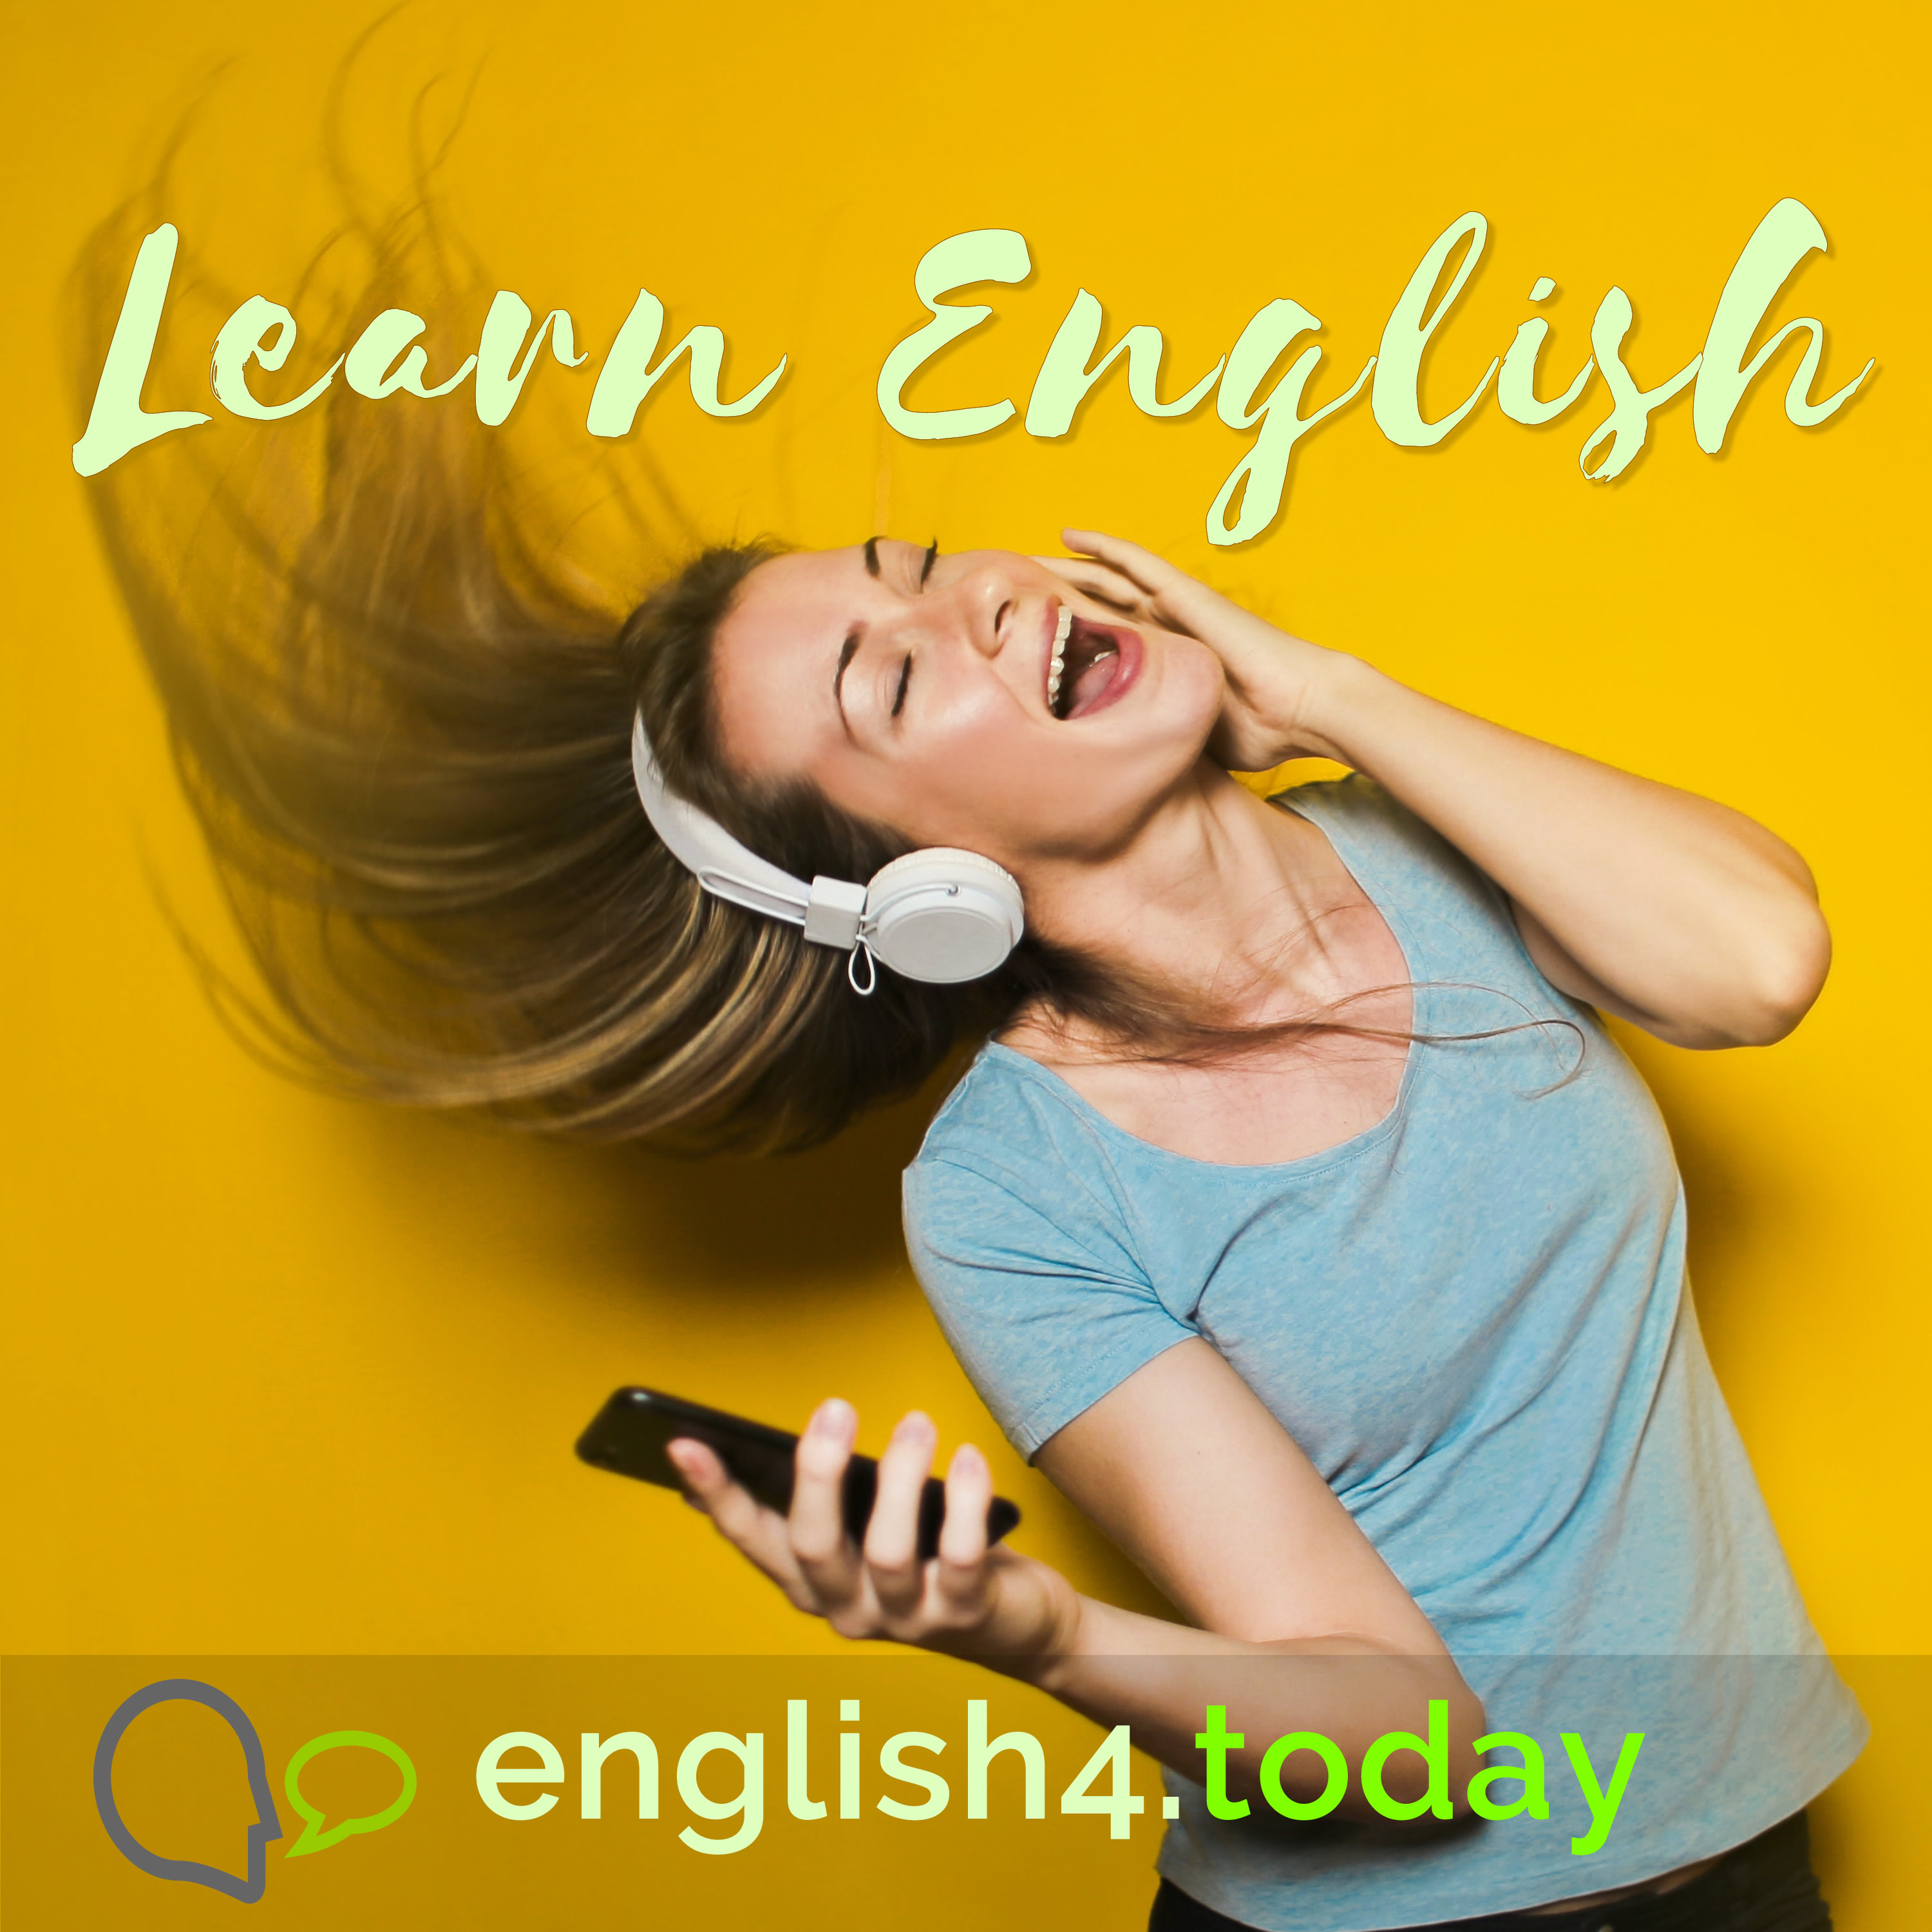 English4.today - Learn English Online